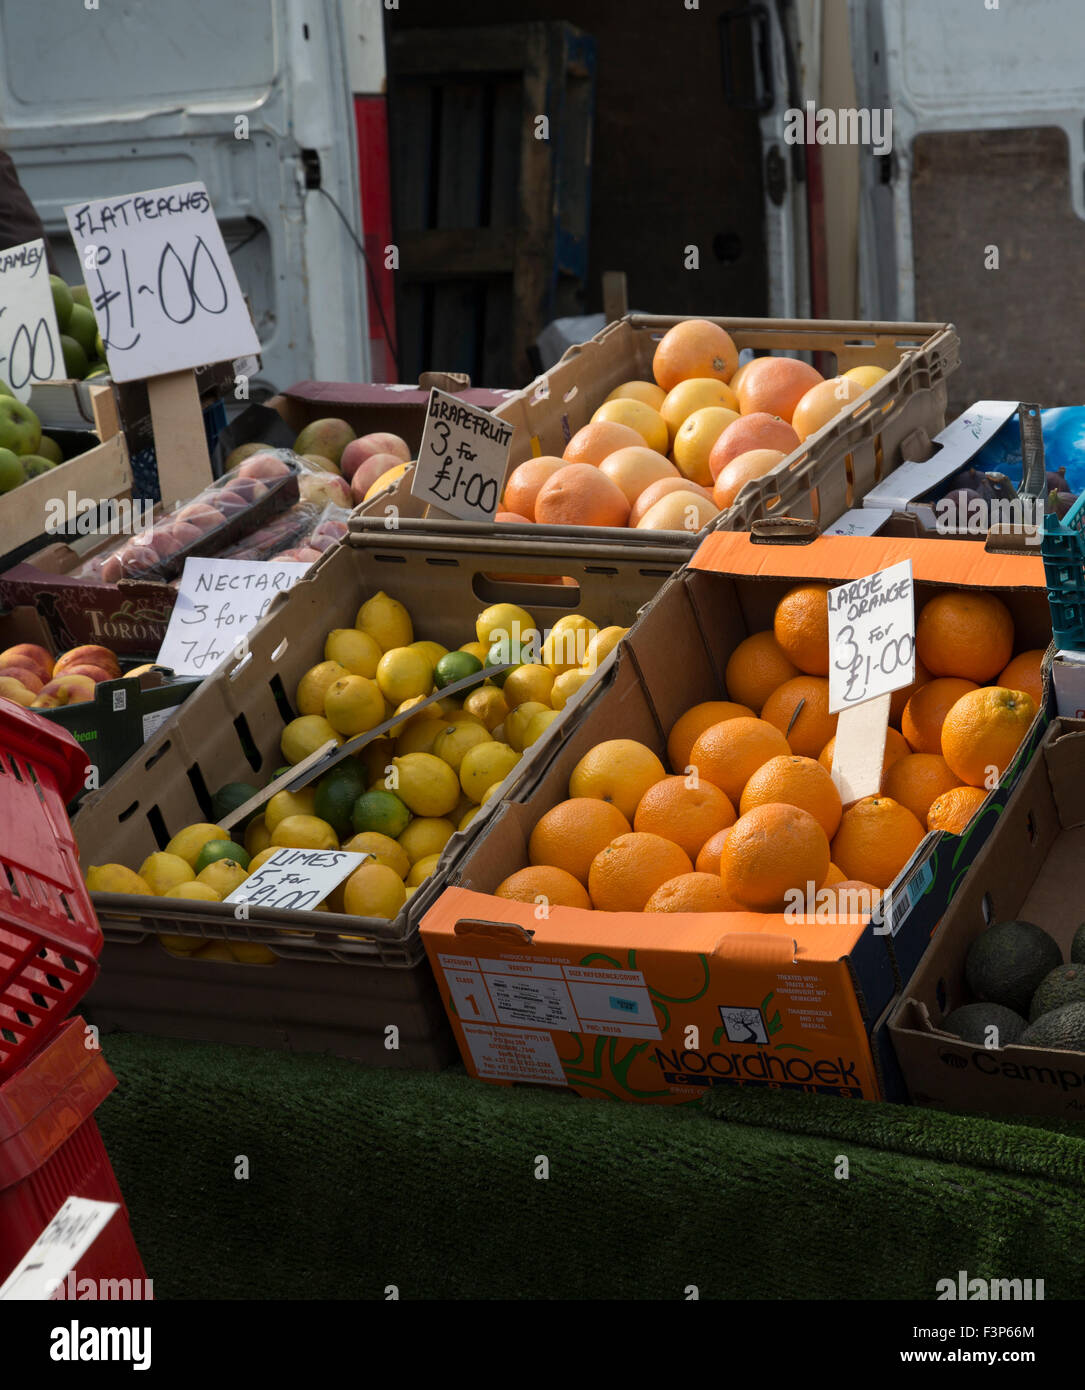 Local market stall selling Fruit, Stock Photo